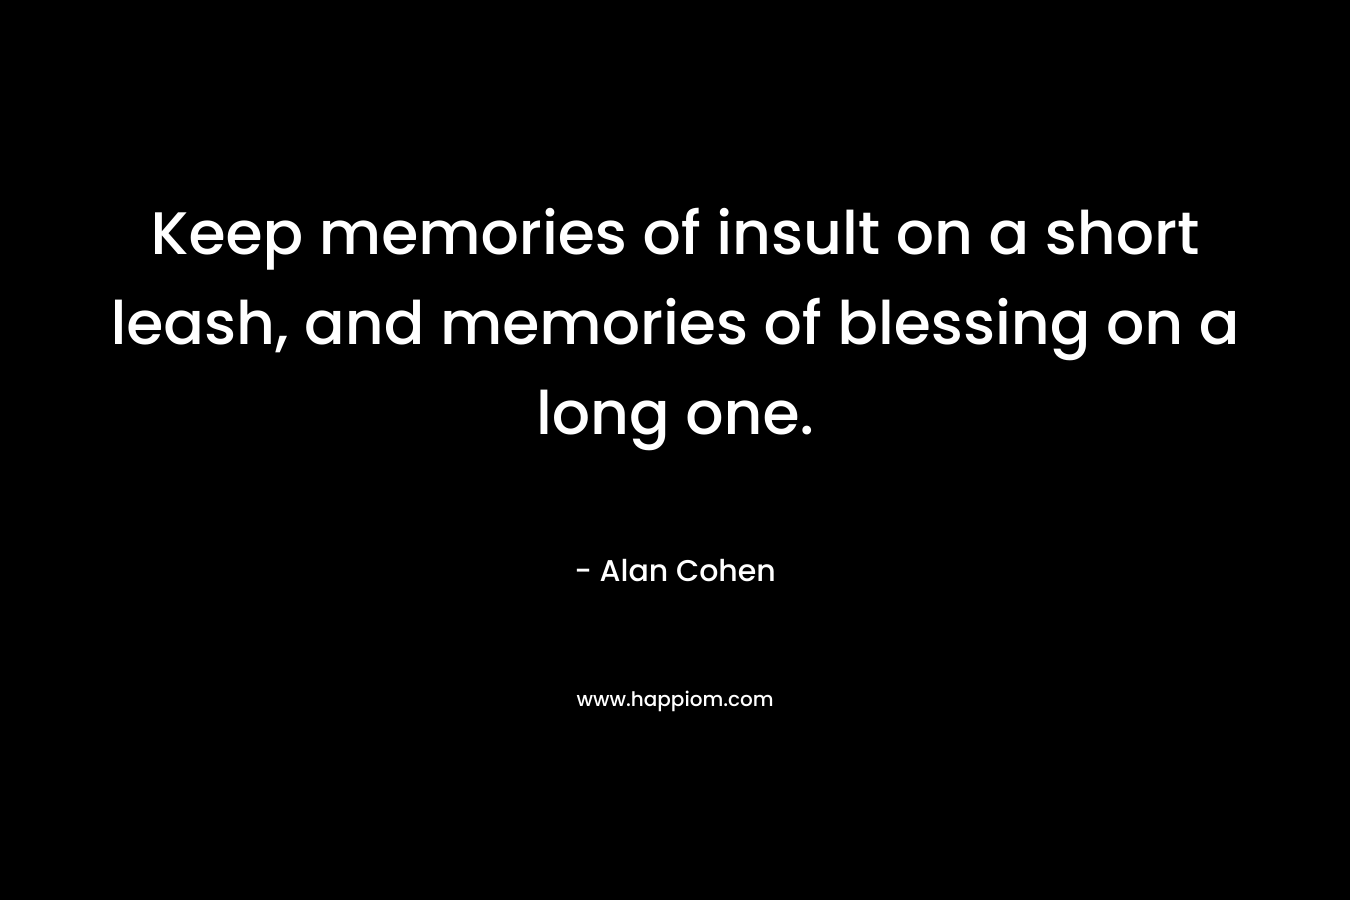 Keep memories of insult on a short leash, and memories of blessing on a long one.